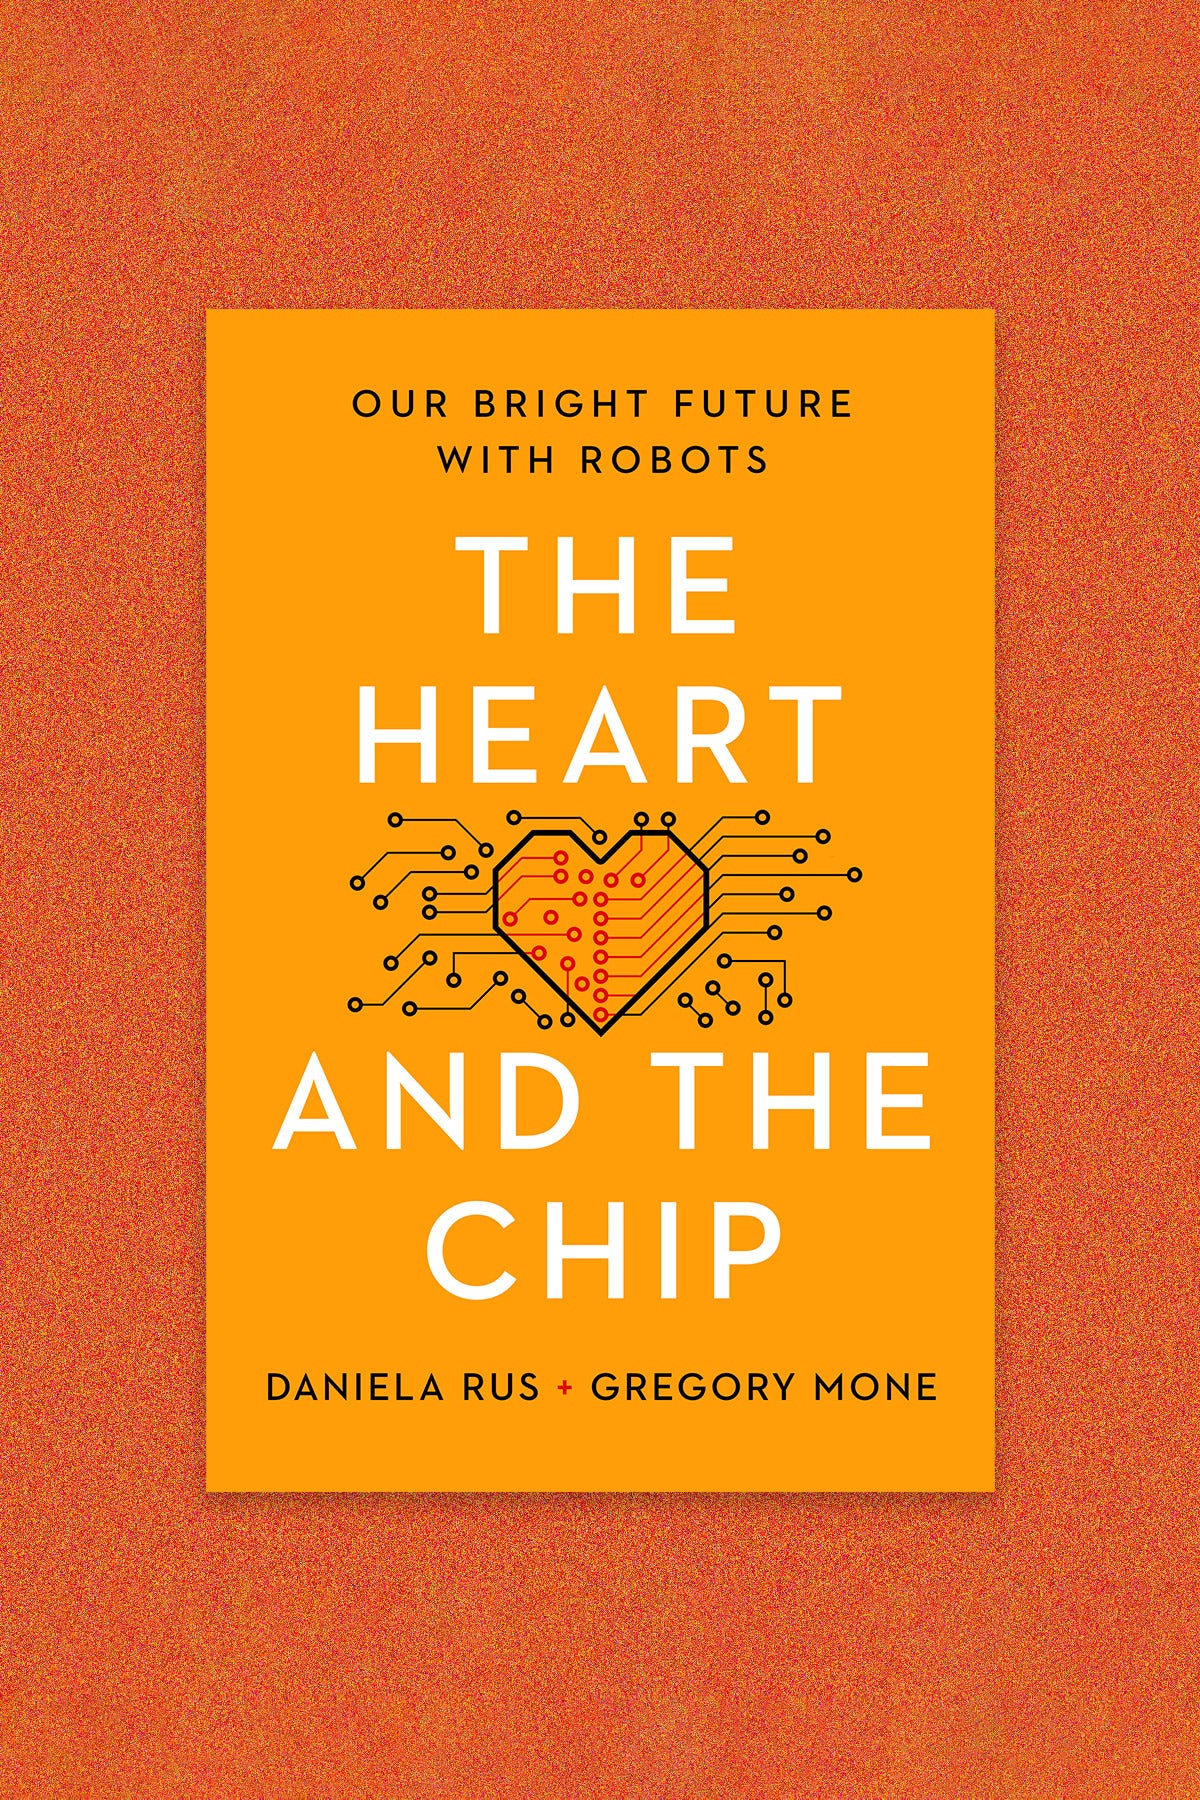 Book cover: Our Bright Future with Robots: The Heart and the Chip by Daniela Rue and Gregory Mone. The cover is orange-gold with white and black text. A heart with microchip lines extending outward is in the center.